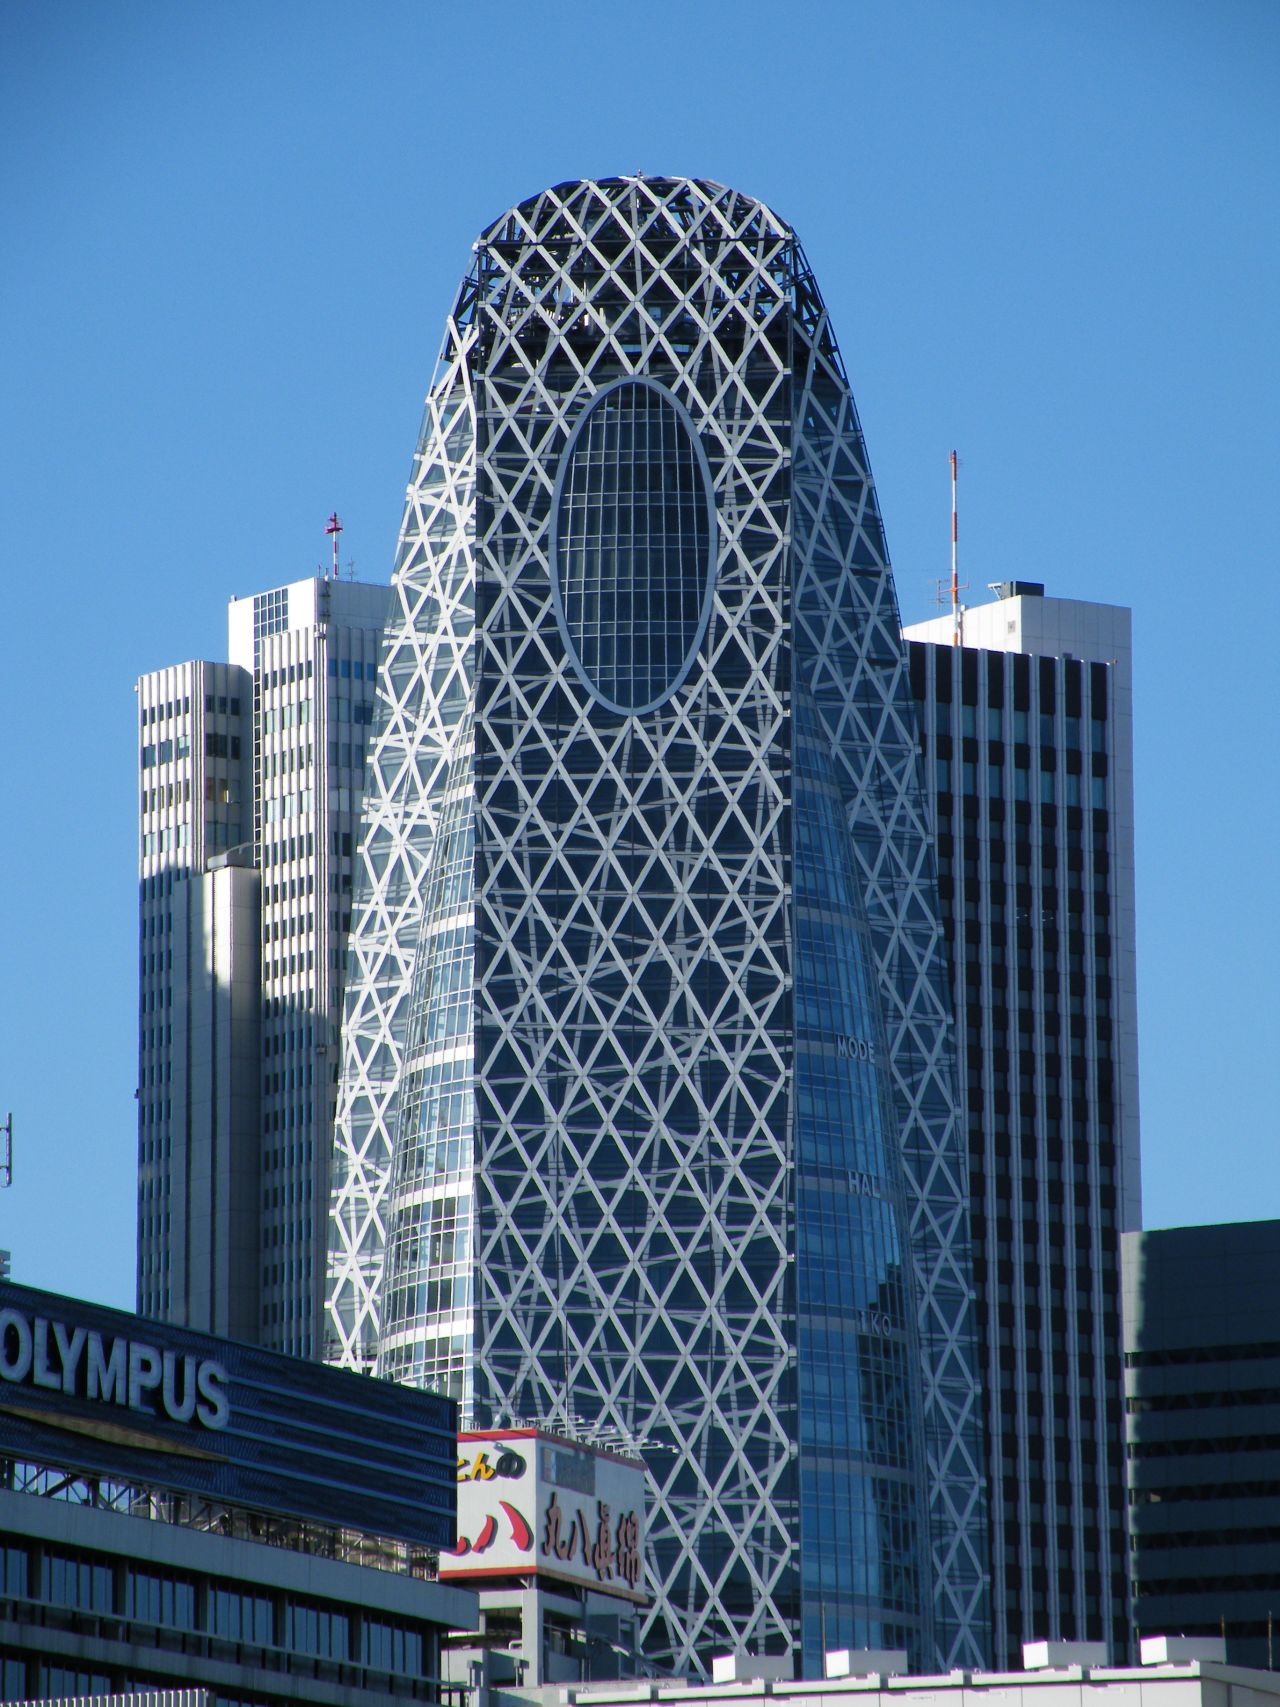 The building has been nicknamed "The Giant Cocoon." Home to three different educational institutions in Tokyo (including a fashion school and a medical college), it's the second-tallest educational building in the world, surpassed only by Lomonosov Moscow State University Main Building. <strong>Architects:</strong> Tange Associates.